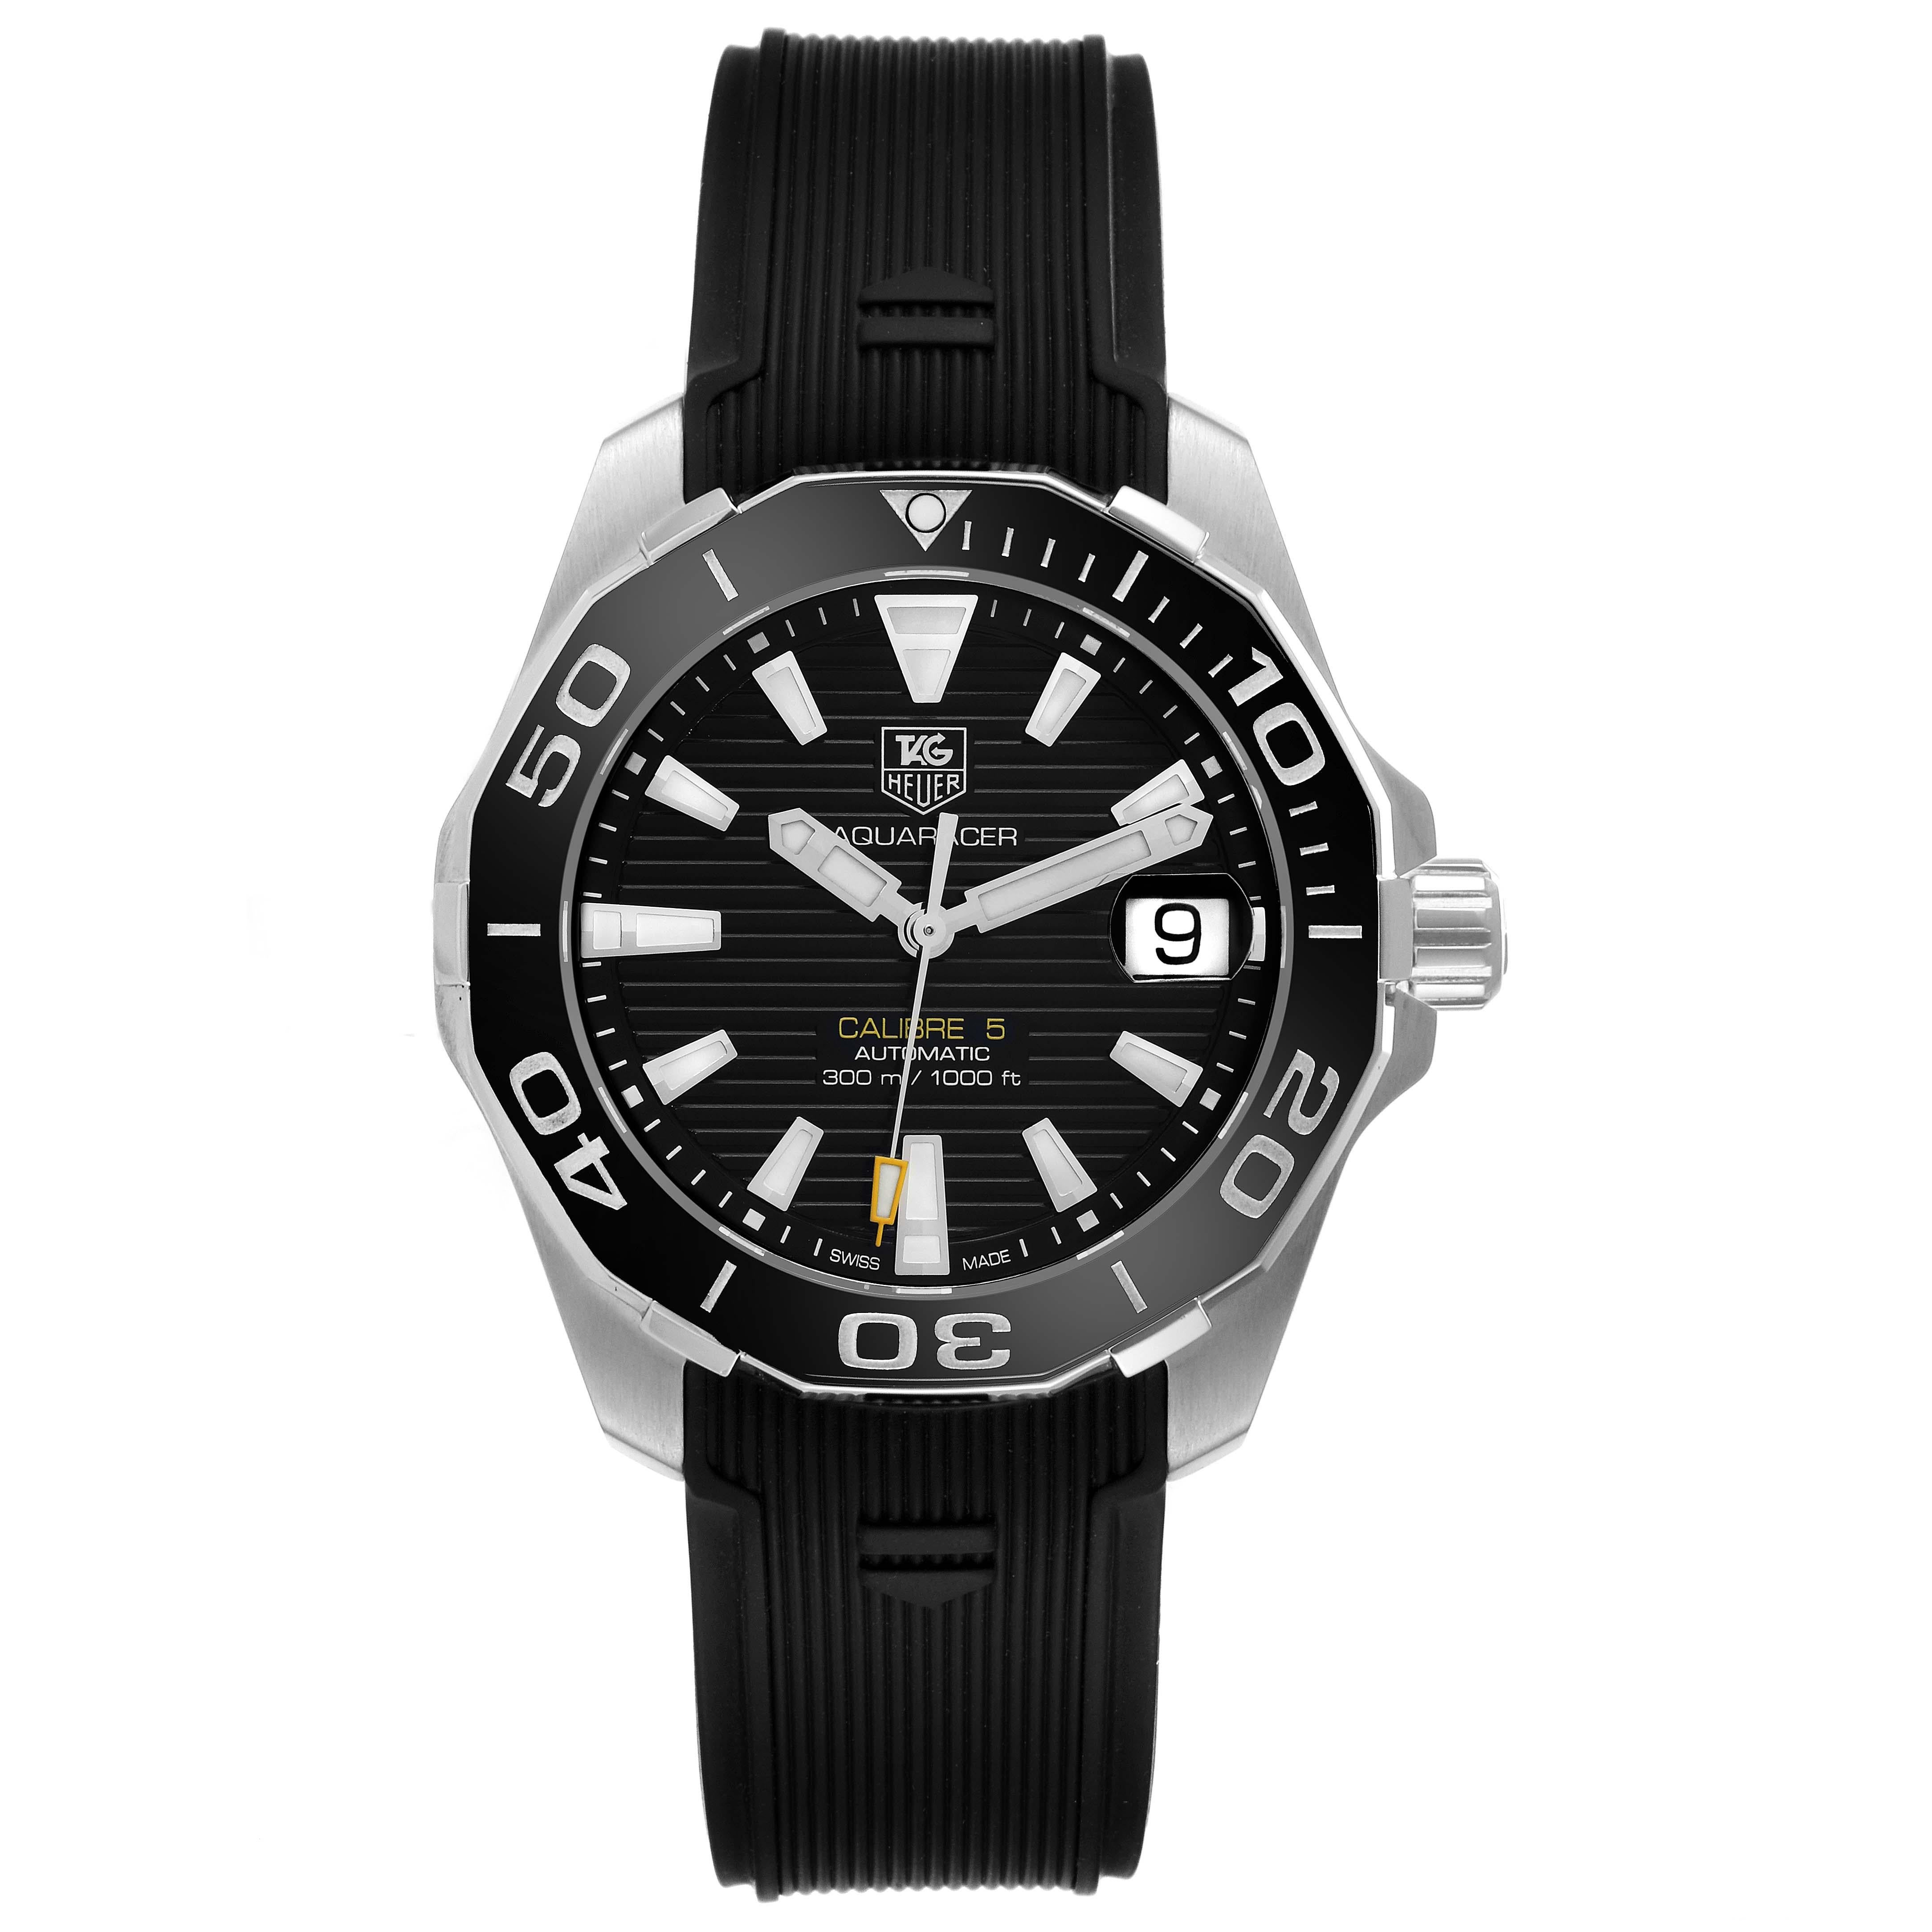 Tag Heuer Aquaracer Black Dial Steel Mens Watch WAY211A Box Card. Automatic self-winding movement. Stainless steel case 41.0 mm in diameter. Black unidirectional rotating bezel. Scratch resistant sapphire crystal with cyclops magnifier. Black dial